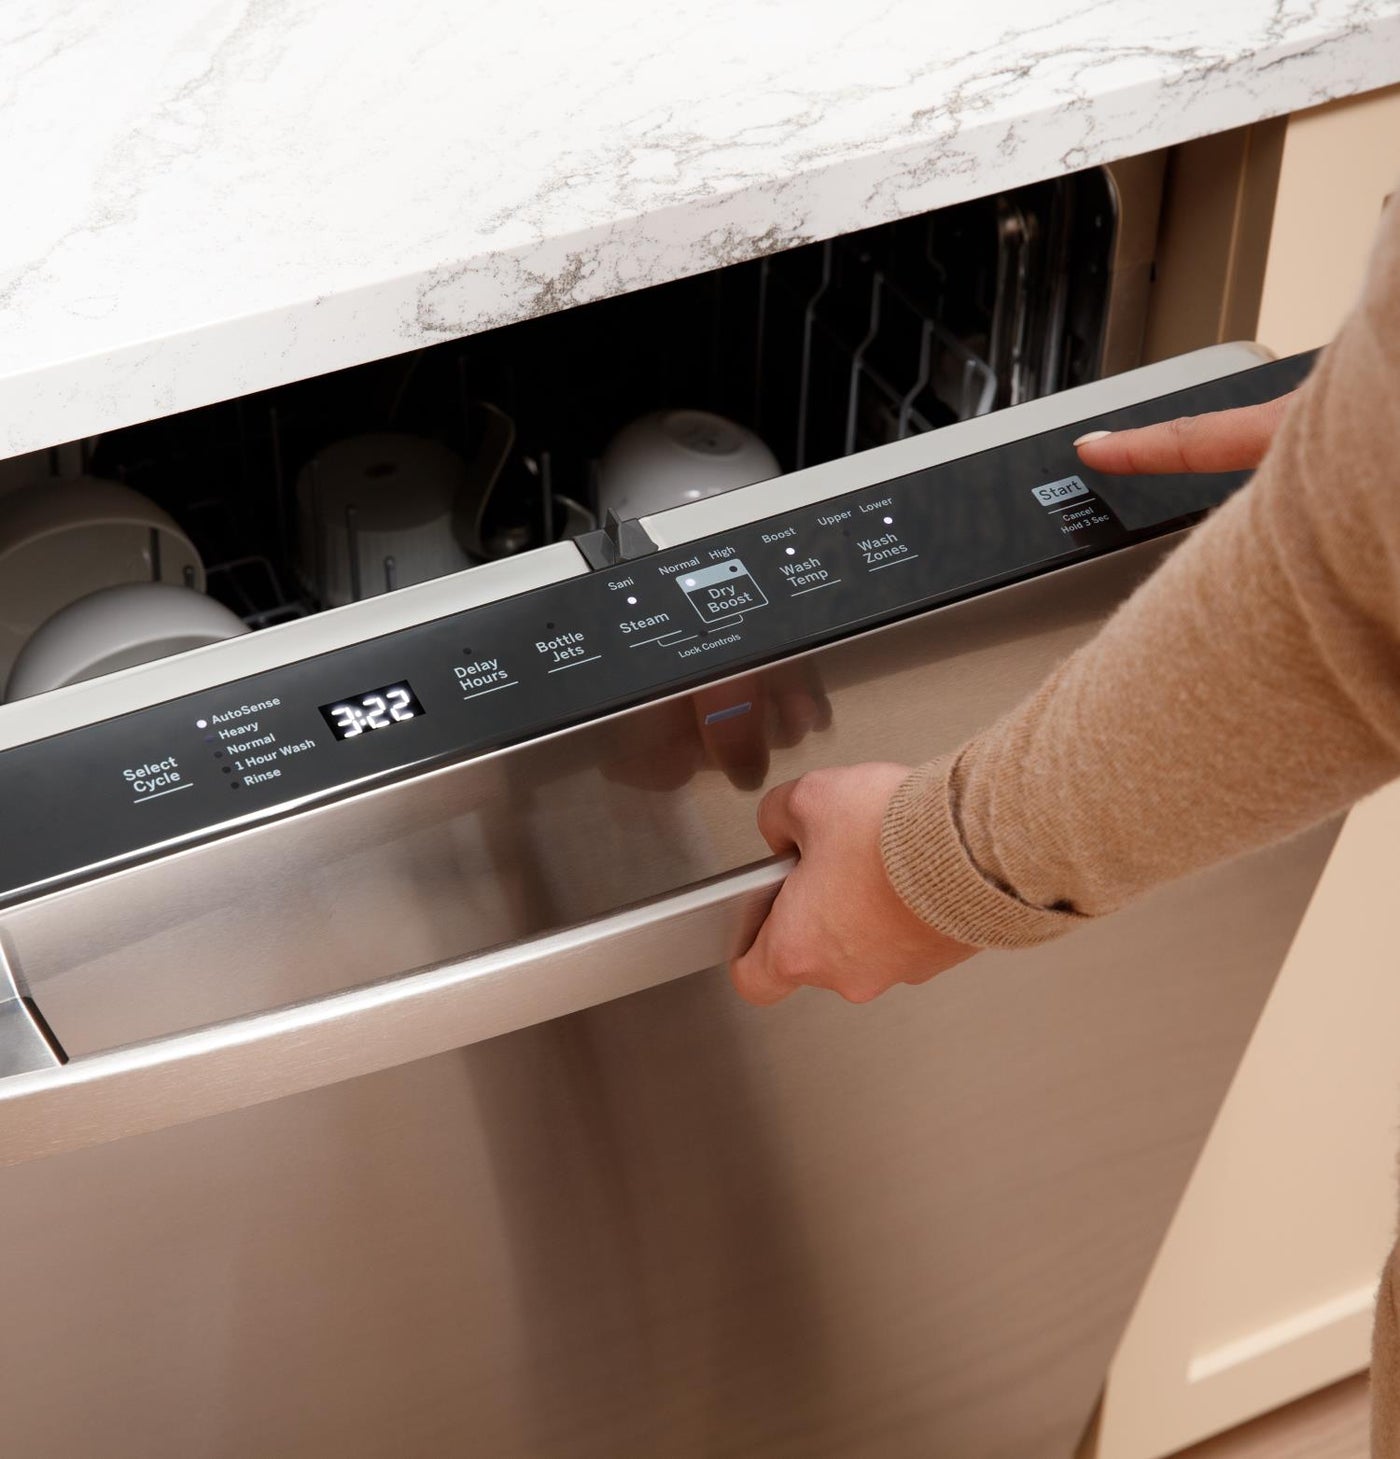 GE 24" Fingerprint Resistant Stainless Steel Top Control Dishwasher with Stainless Steel Interior and Third Rack - GDT650SYVFS